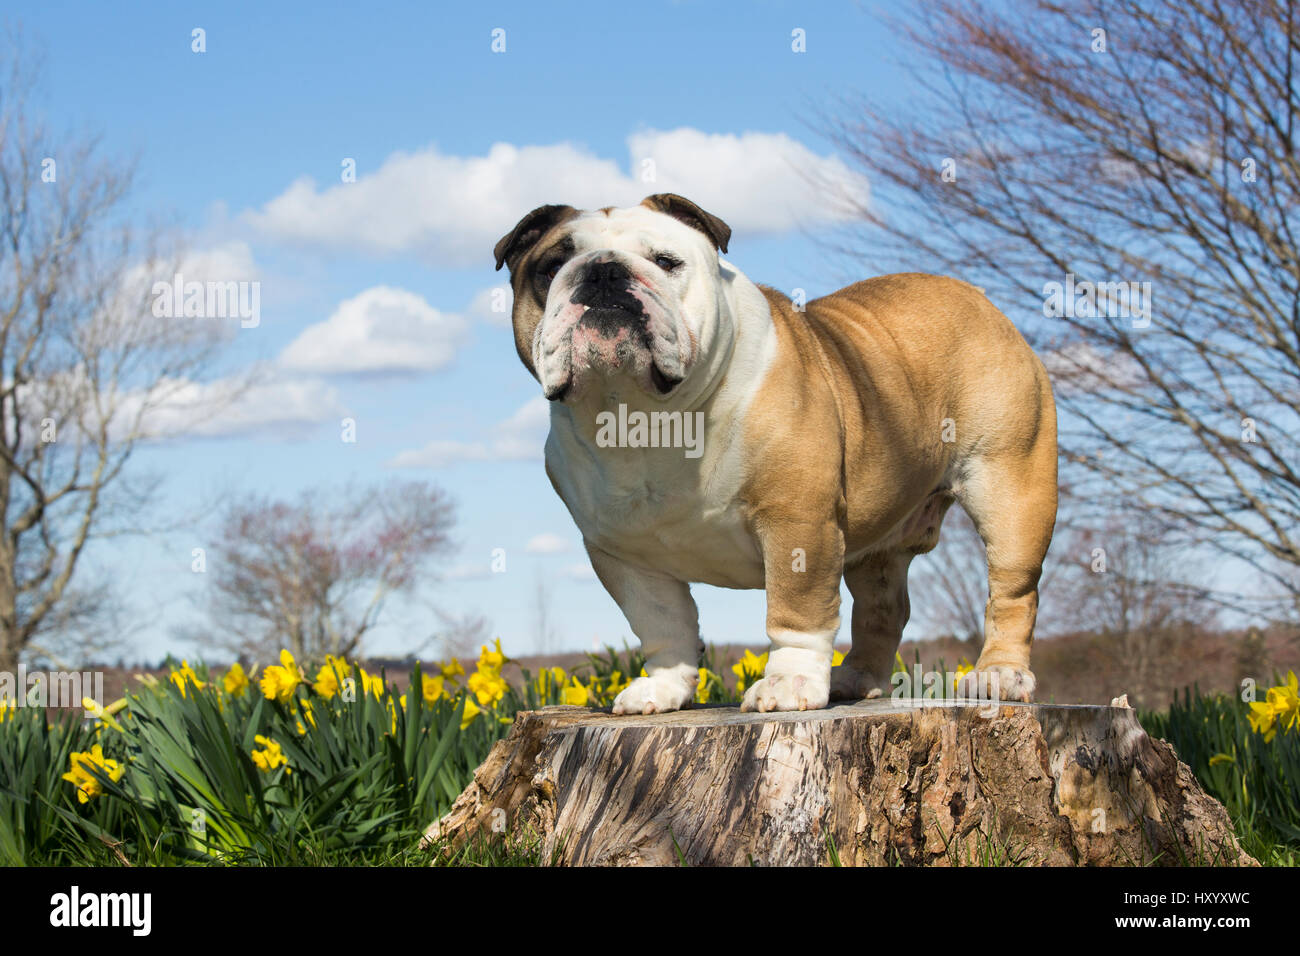 Portrait of domestic English bulldog in daffodils. Waterford, Connecticut, USA. April. Stock Photo